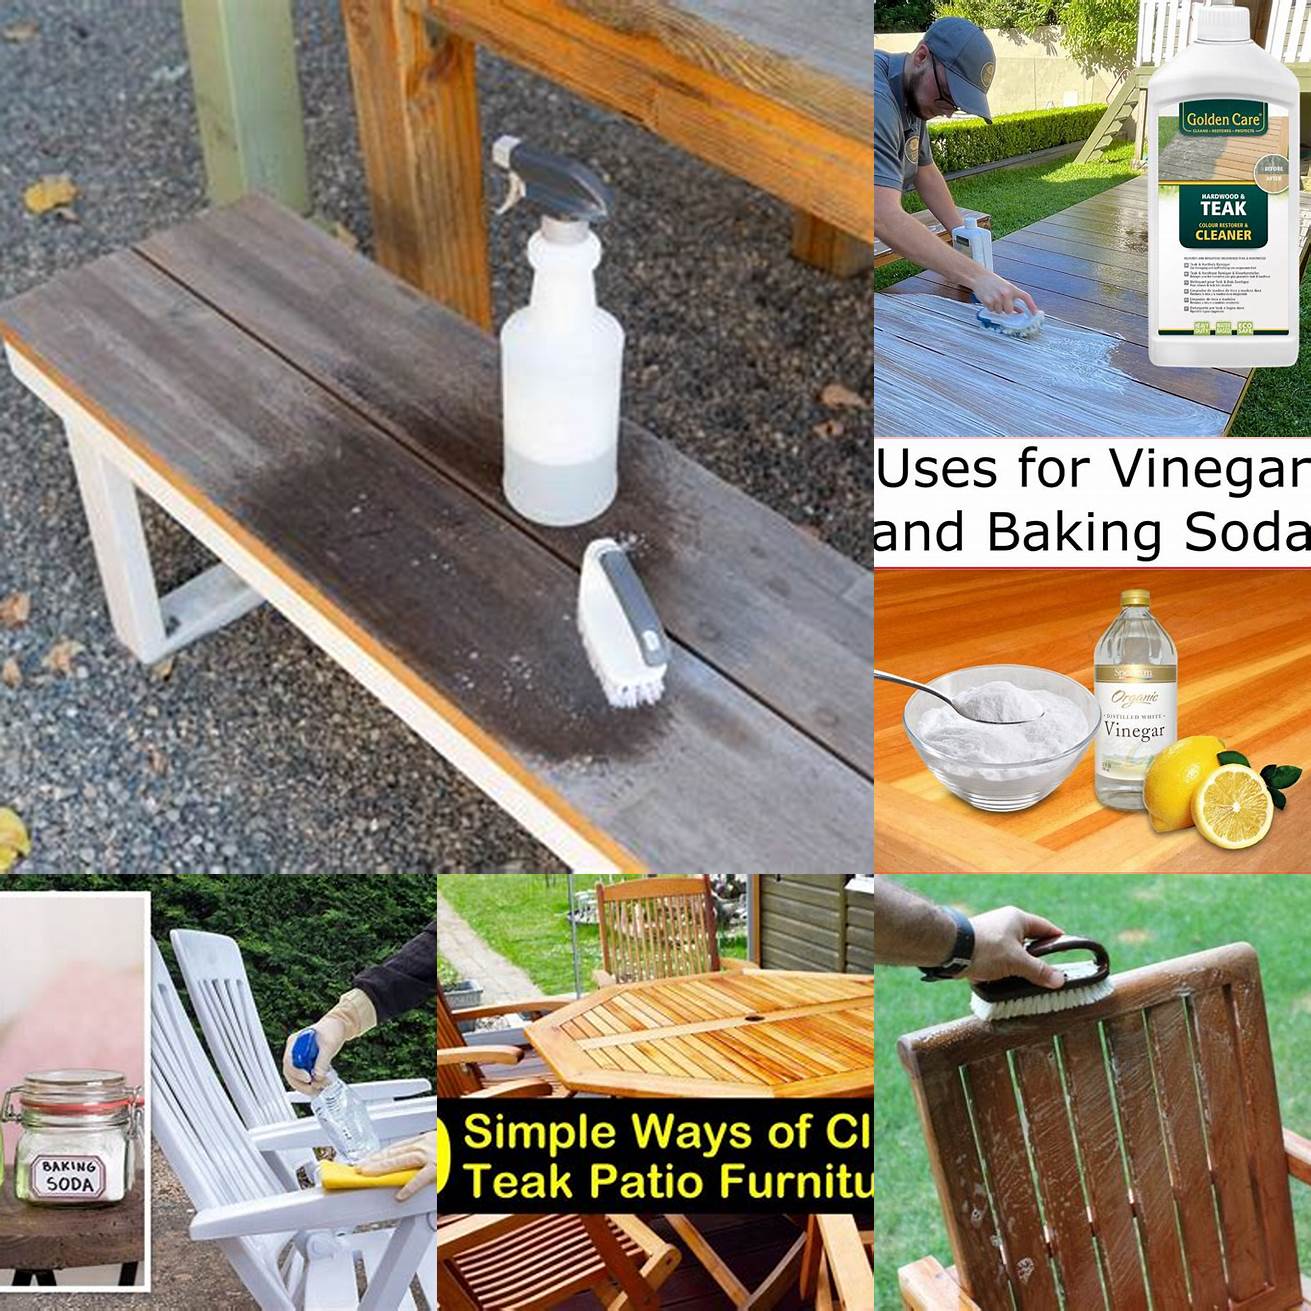 Cleaning Teak Furniture with Vinegar and Baking Soda